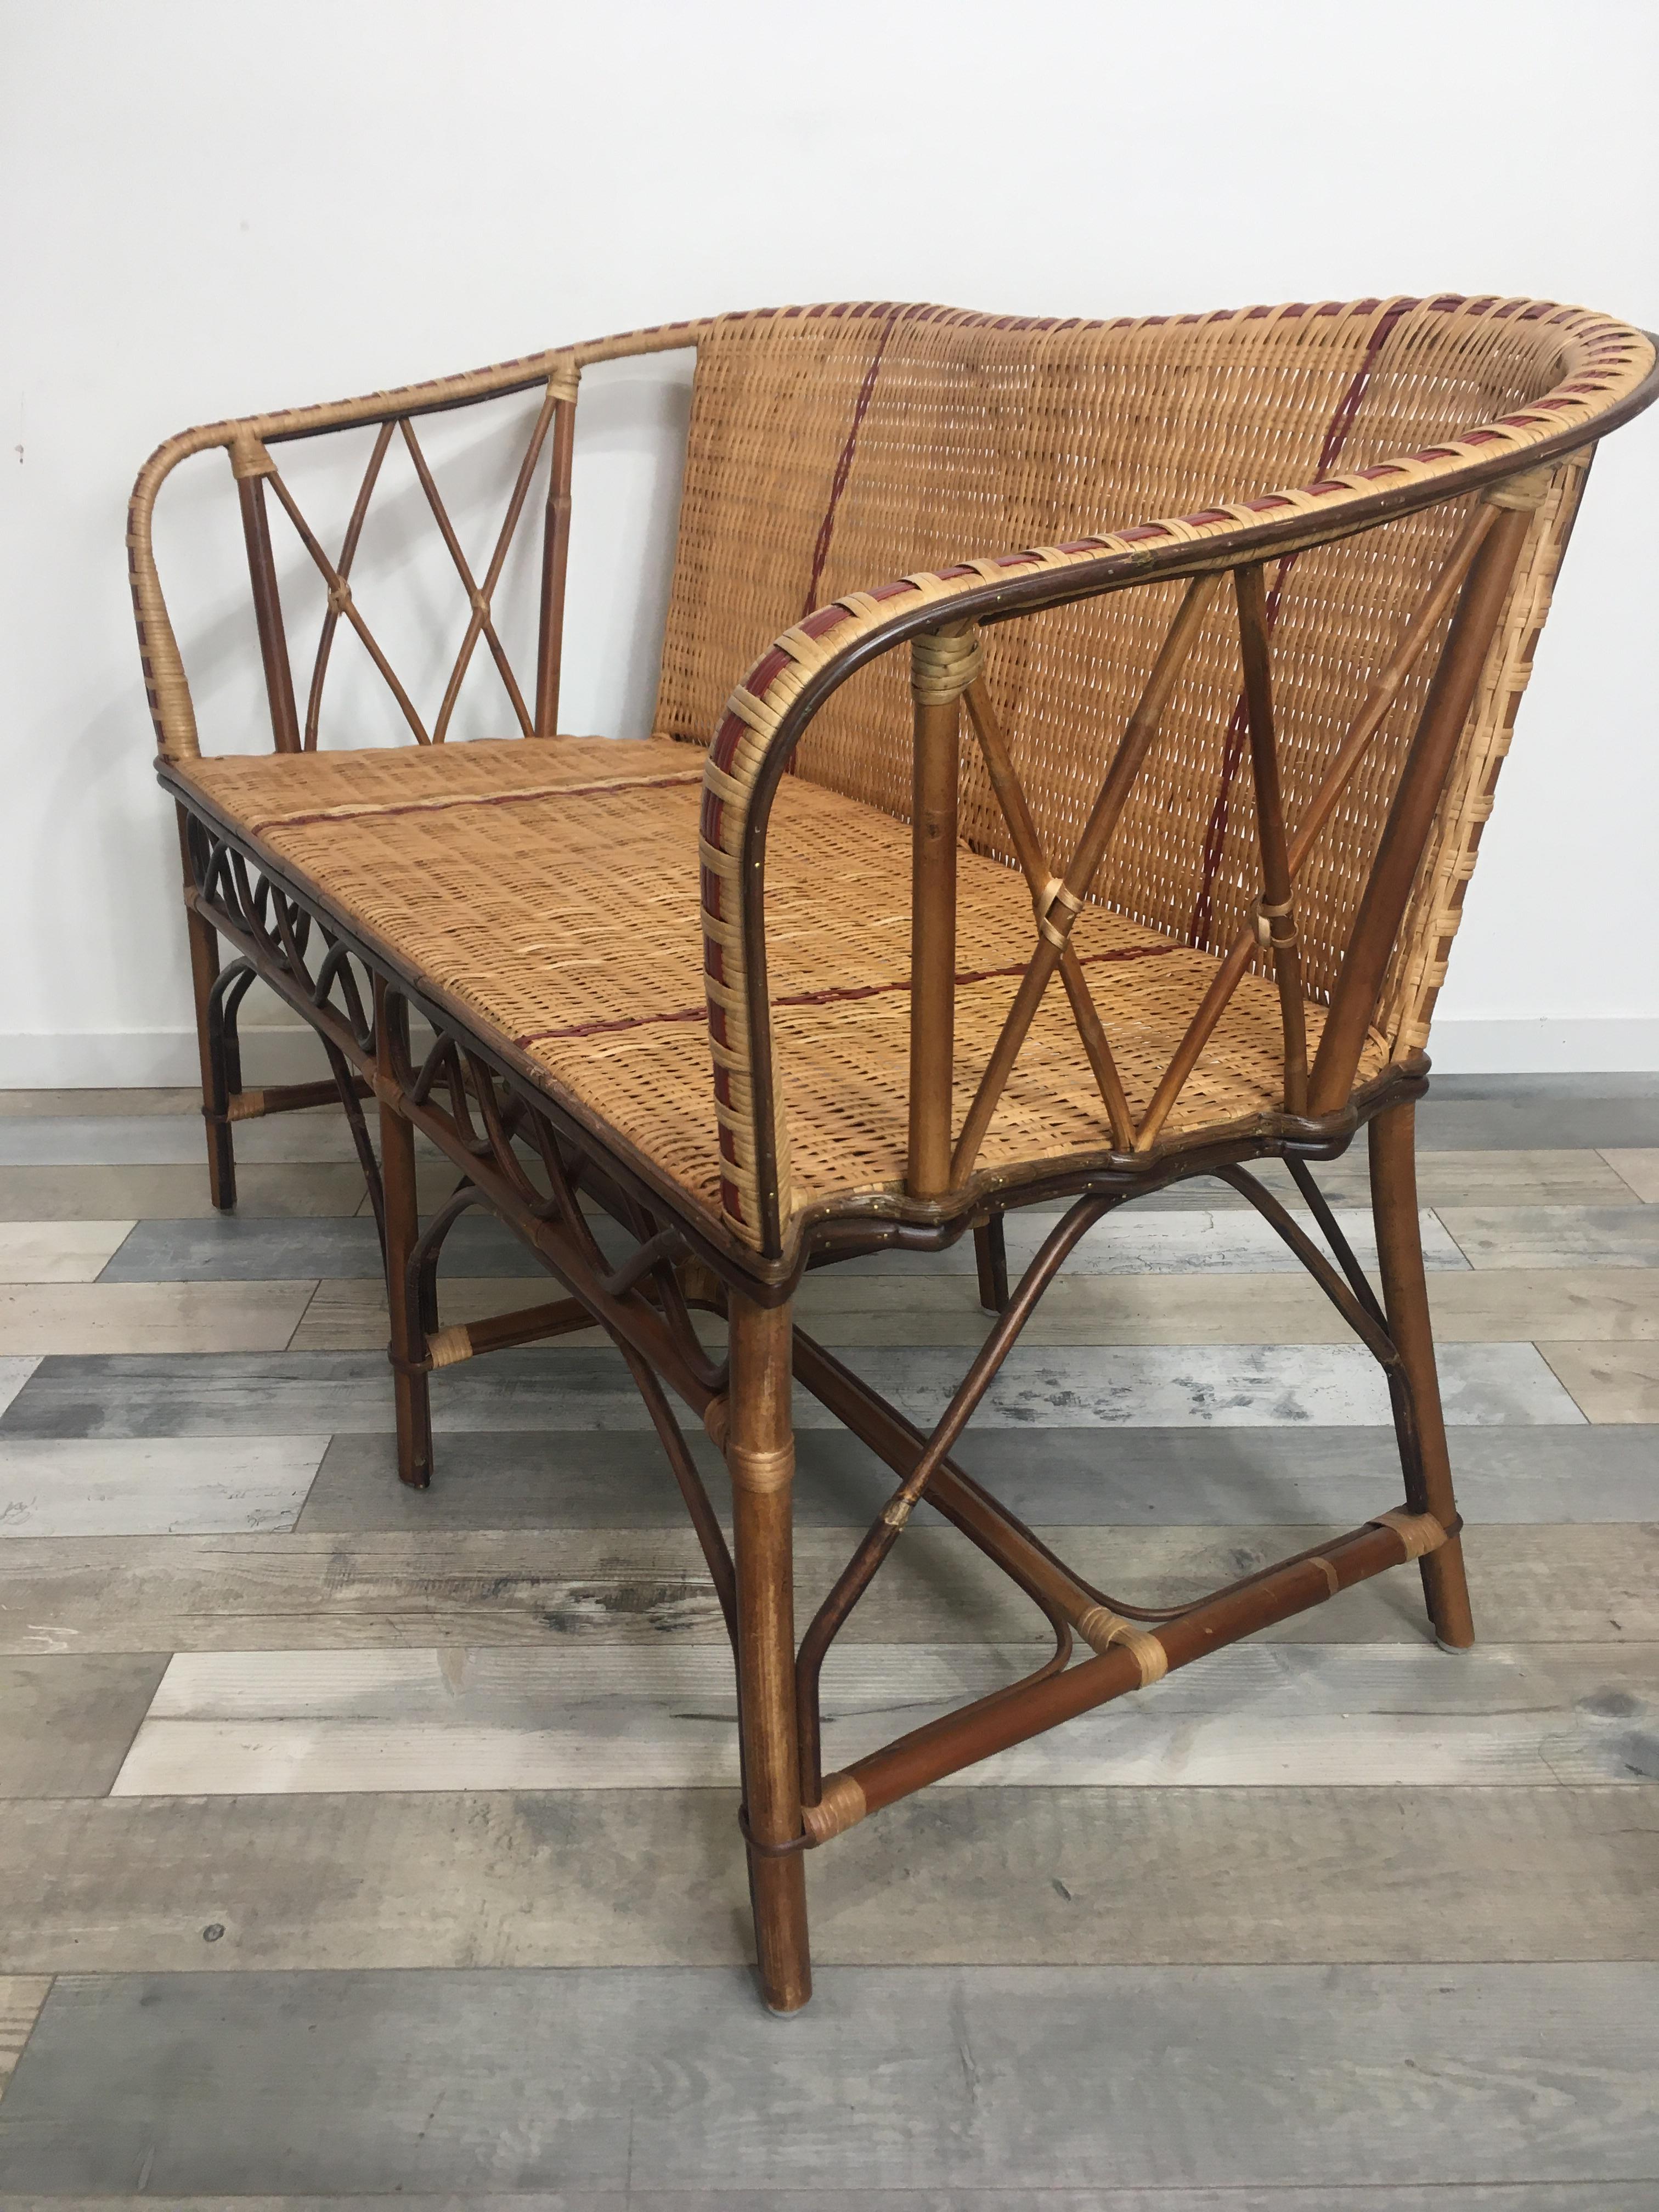 French 1900s Design Bistro Style rattan and braided wicker cane sofa composed of a rattan structure, braided rattan wicker cane with a red outline finish, famous at the beginning of the 20th century in Paris and their bistro terrace, it will be